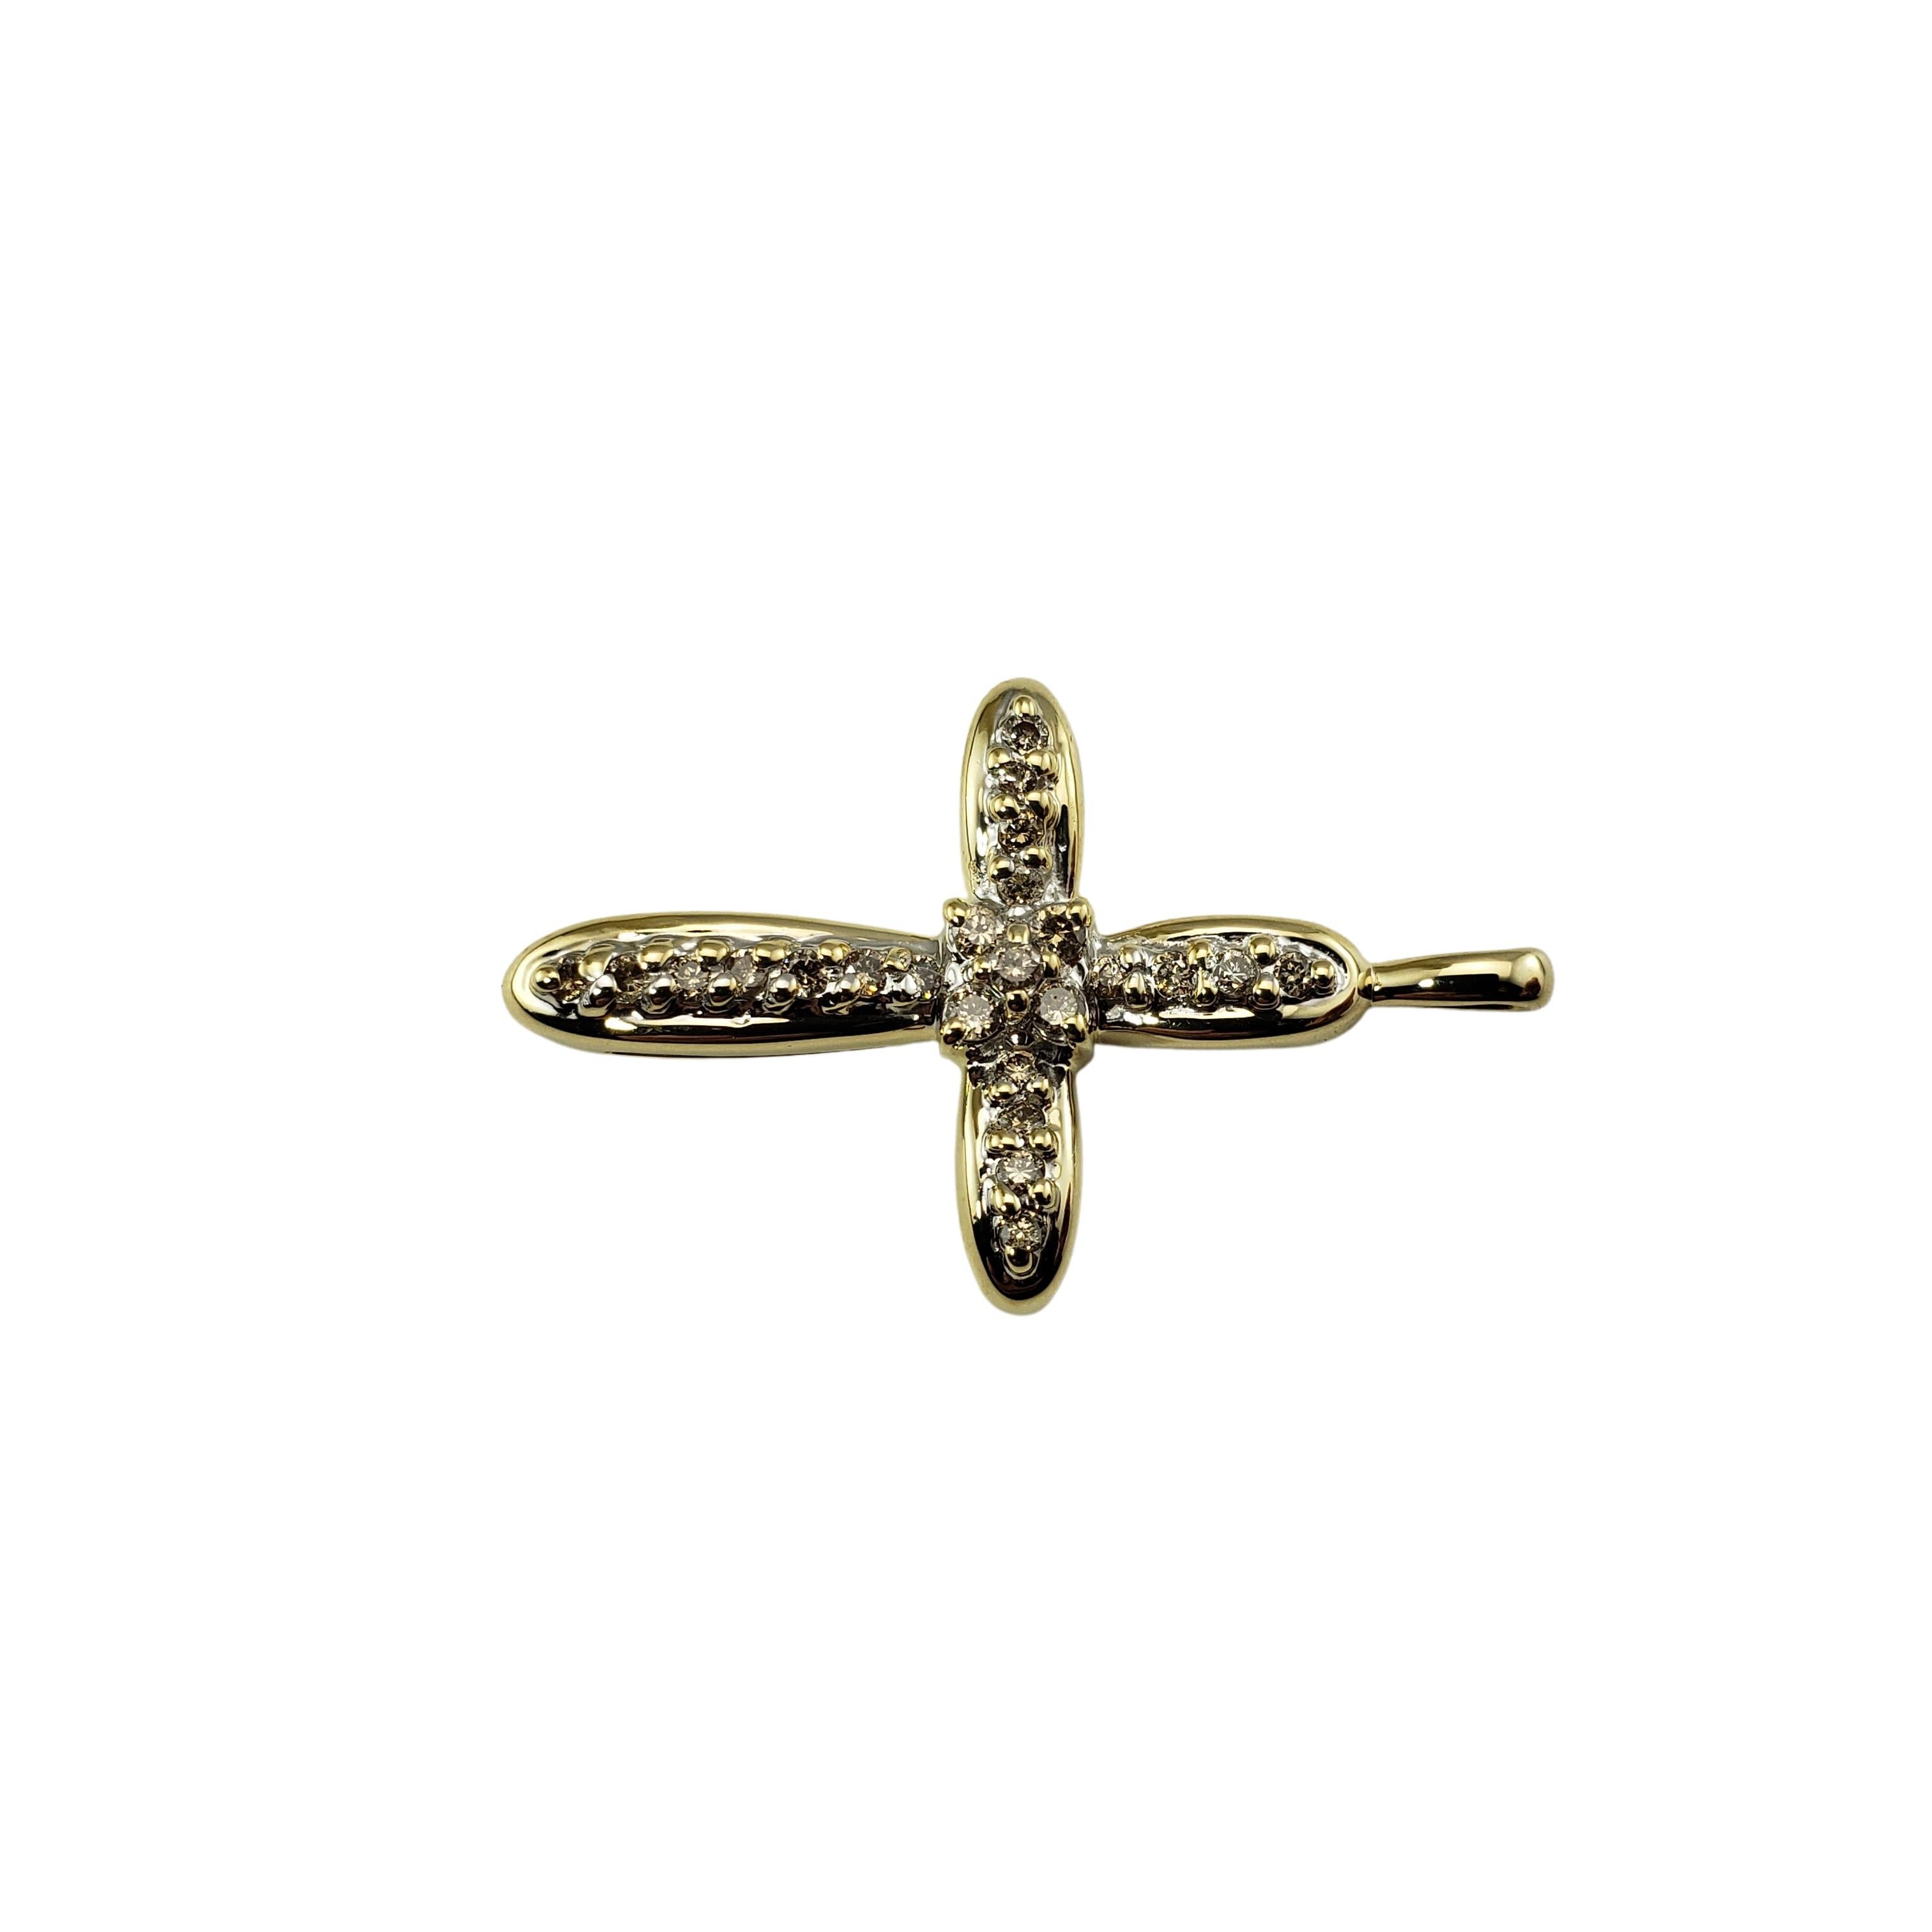 Vintage 10 Karat Yellow Gold and Diamond Cross Pendant-

This lovely cross pendant features 24 round brilliant cut diamonds set in classic 10K yellow gold.

Approximate total diamond weight:  .14 ct.

Diamond color:  L-N

Diamond clarity: 